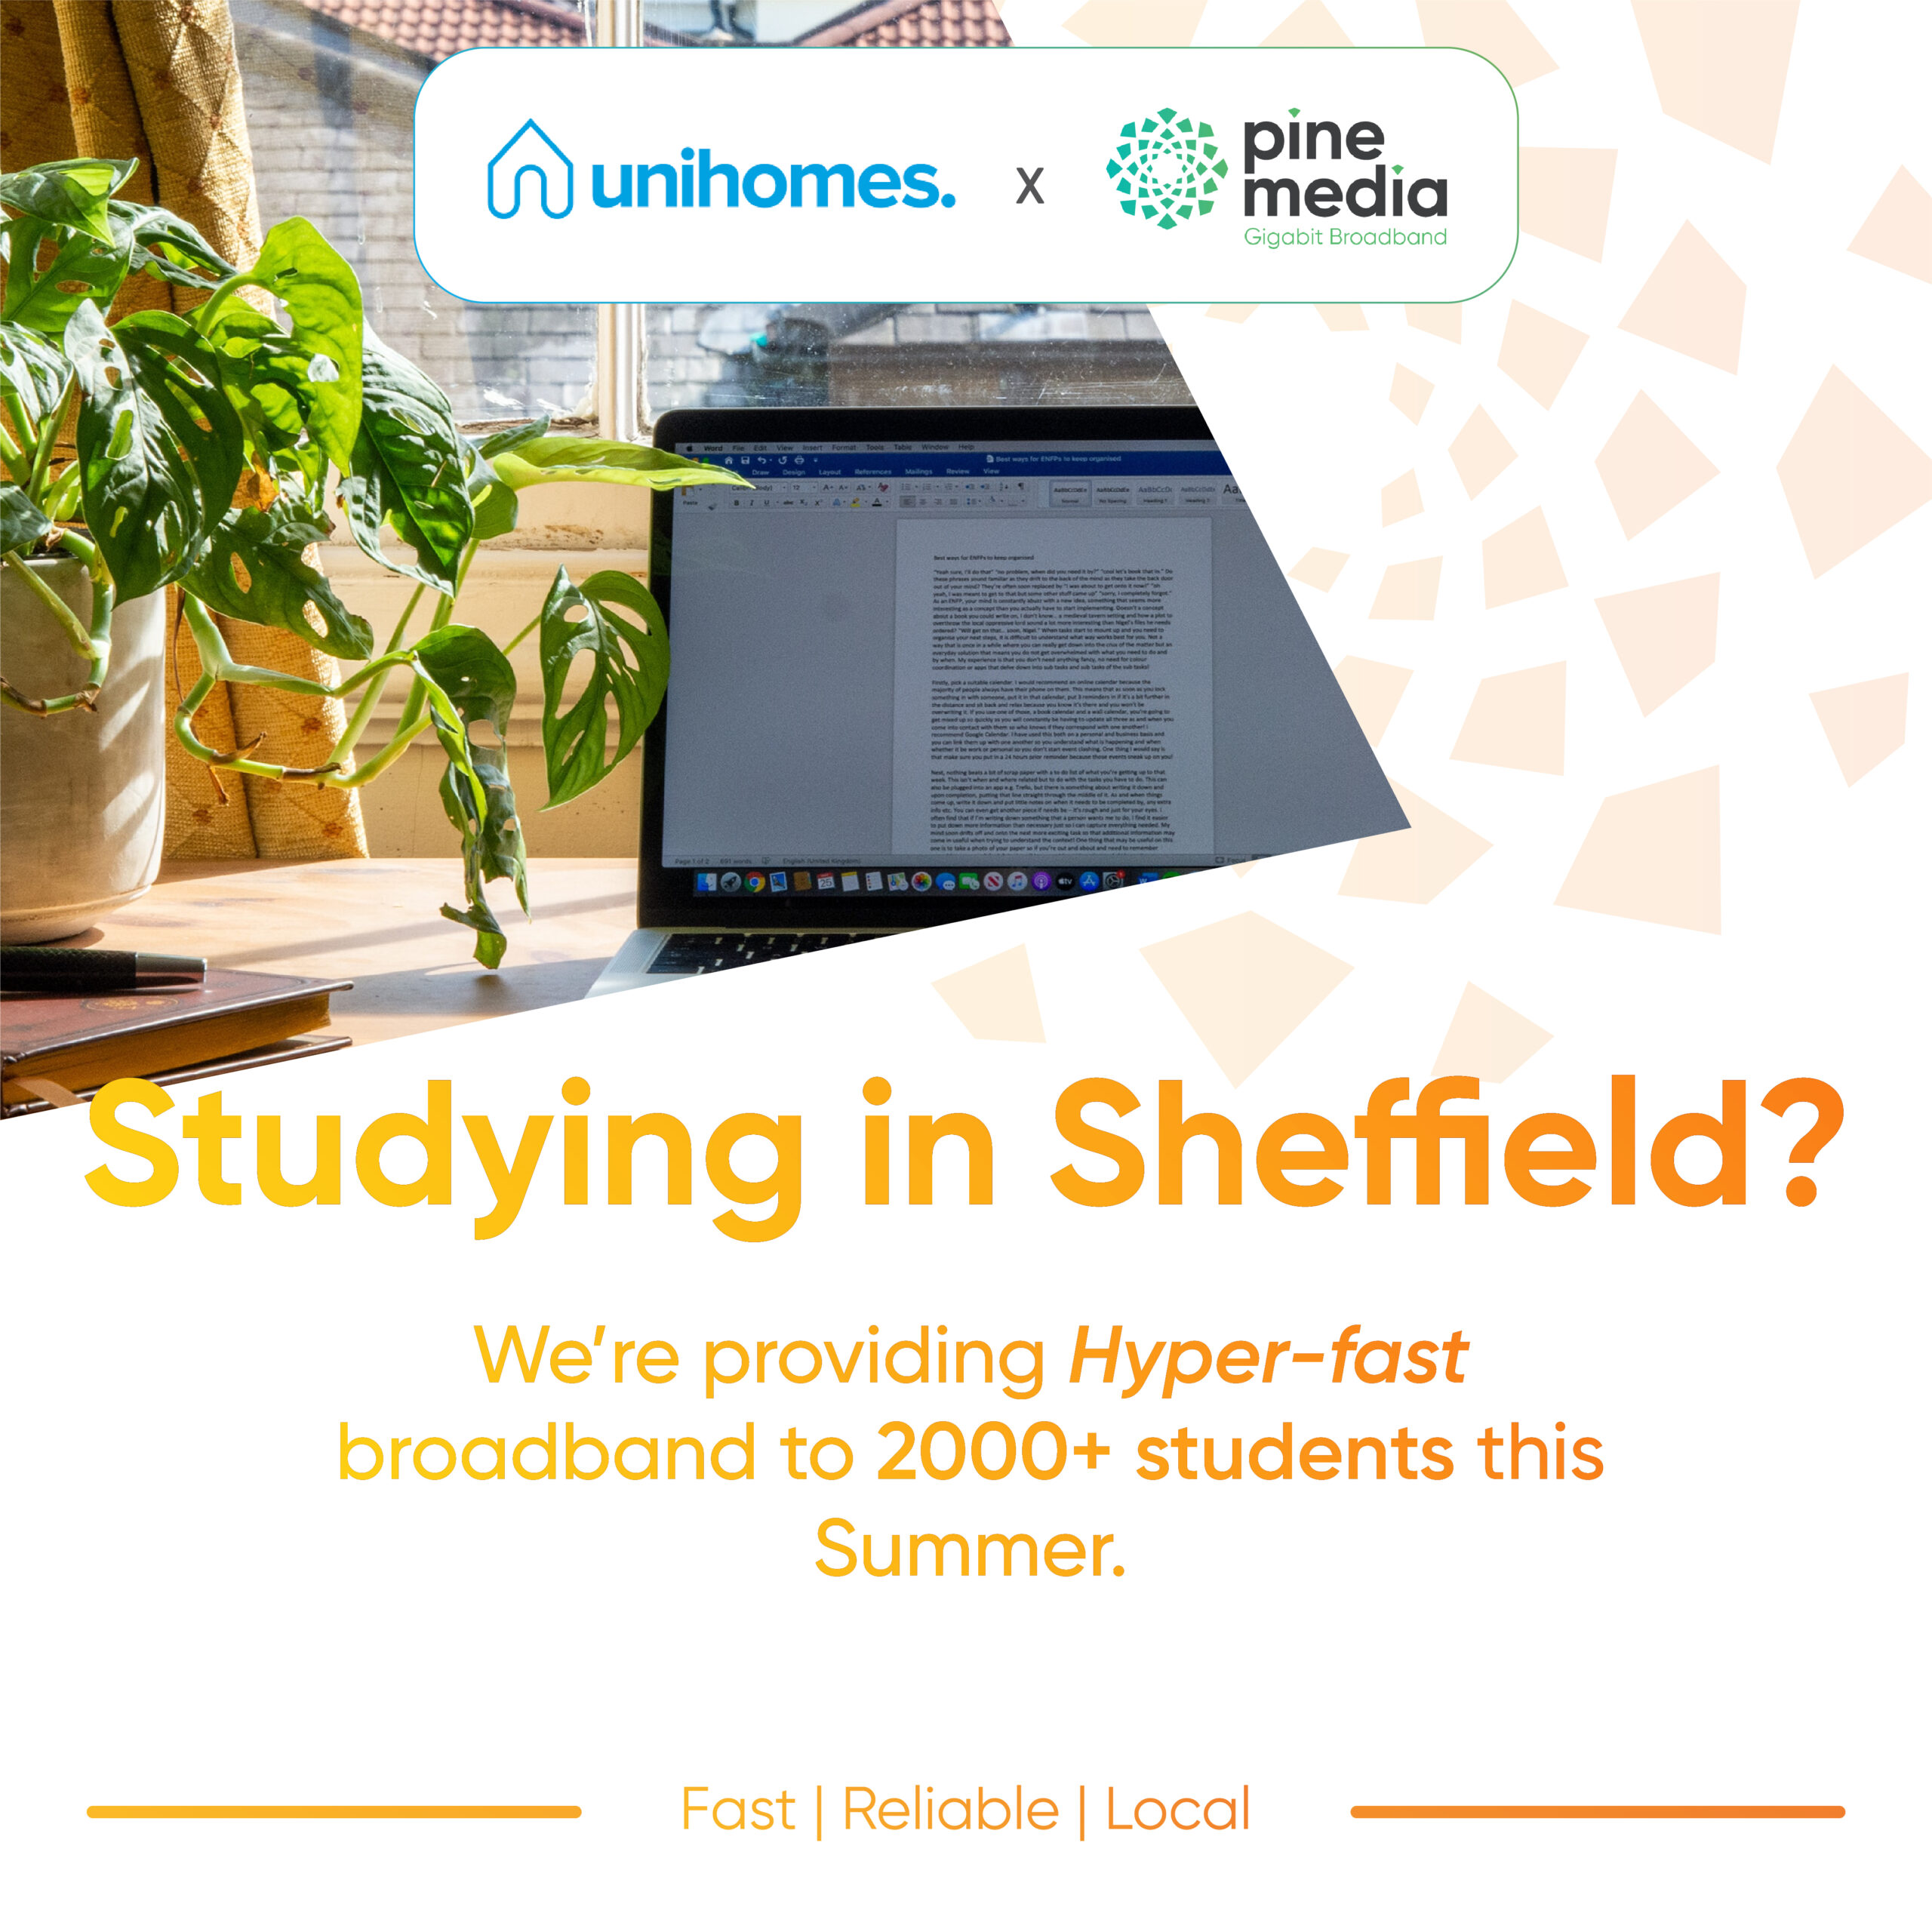 A new partnership with UniHomes connects 2,000+ Sheffield students to Pine Media’s full-fibre broadband this year